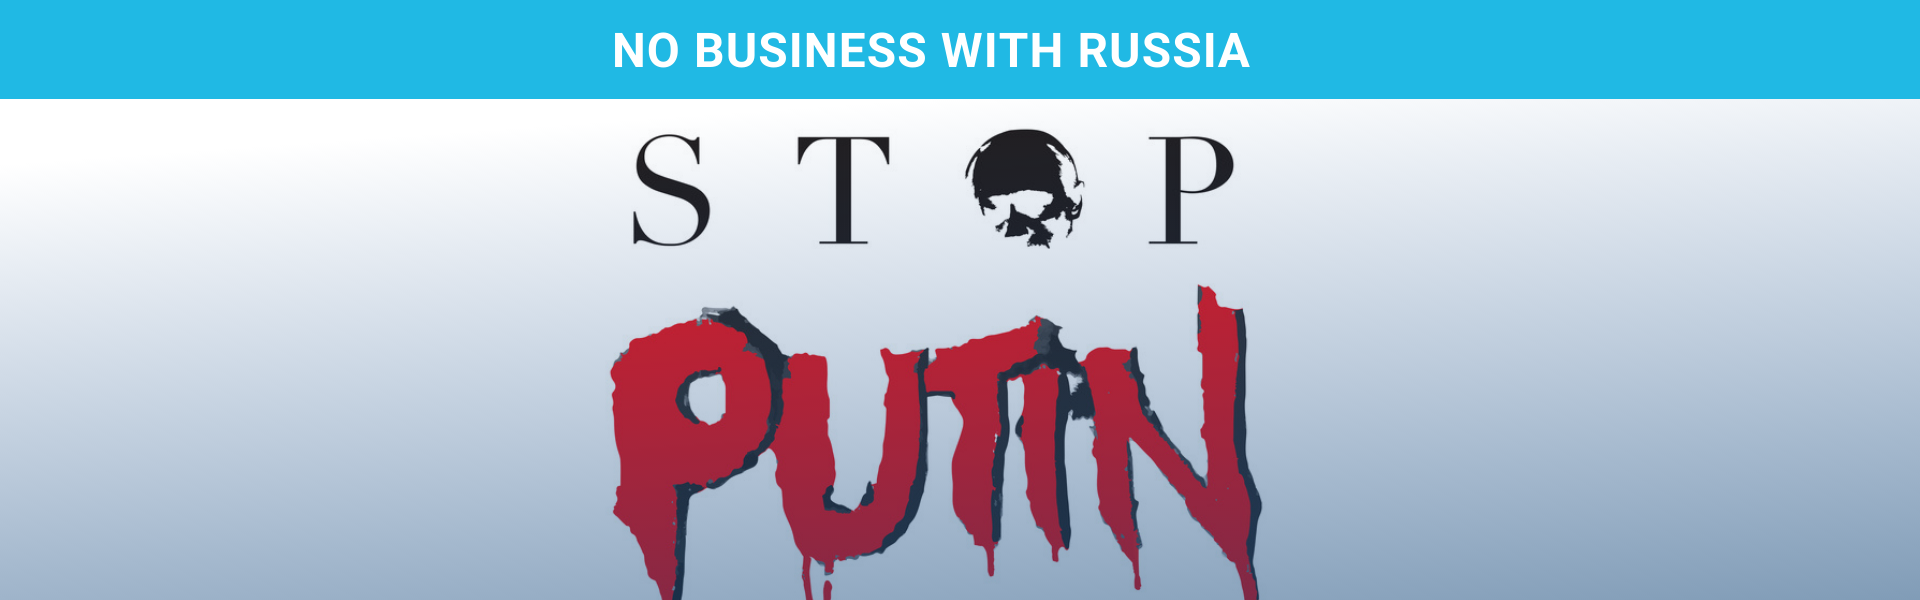 No business with Russia